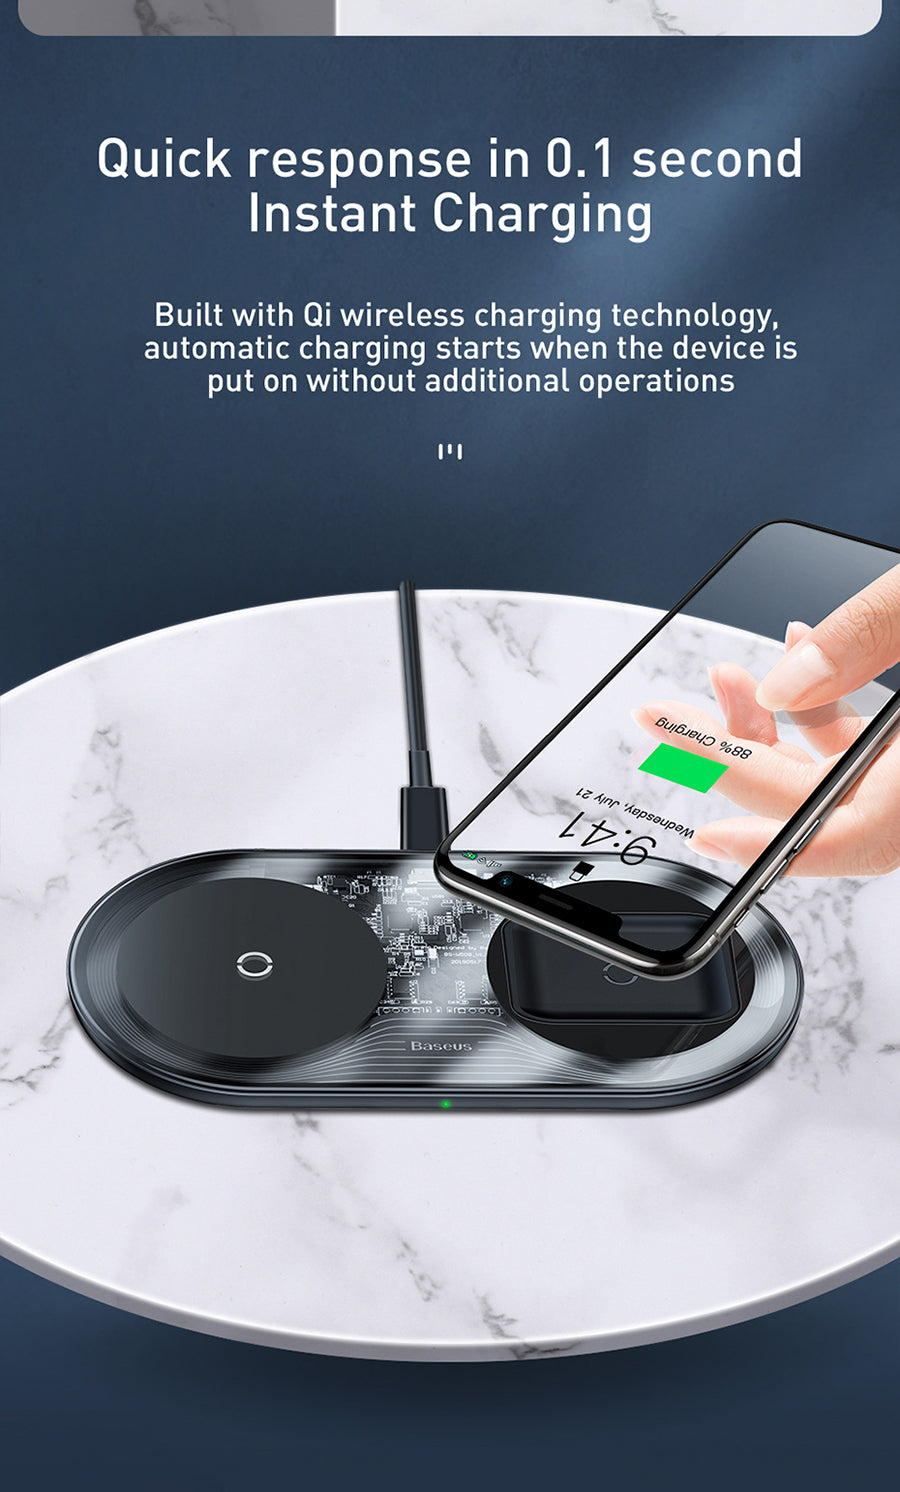 Baseus 15W 2in1 Simple Phone and Airpods Qi Wireless Charger - Black